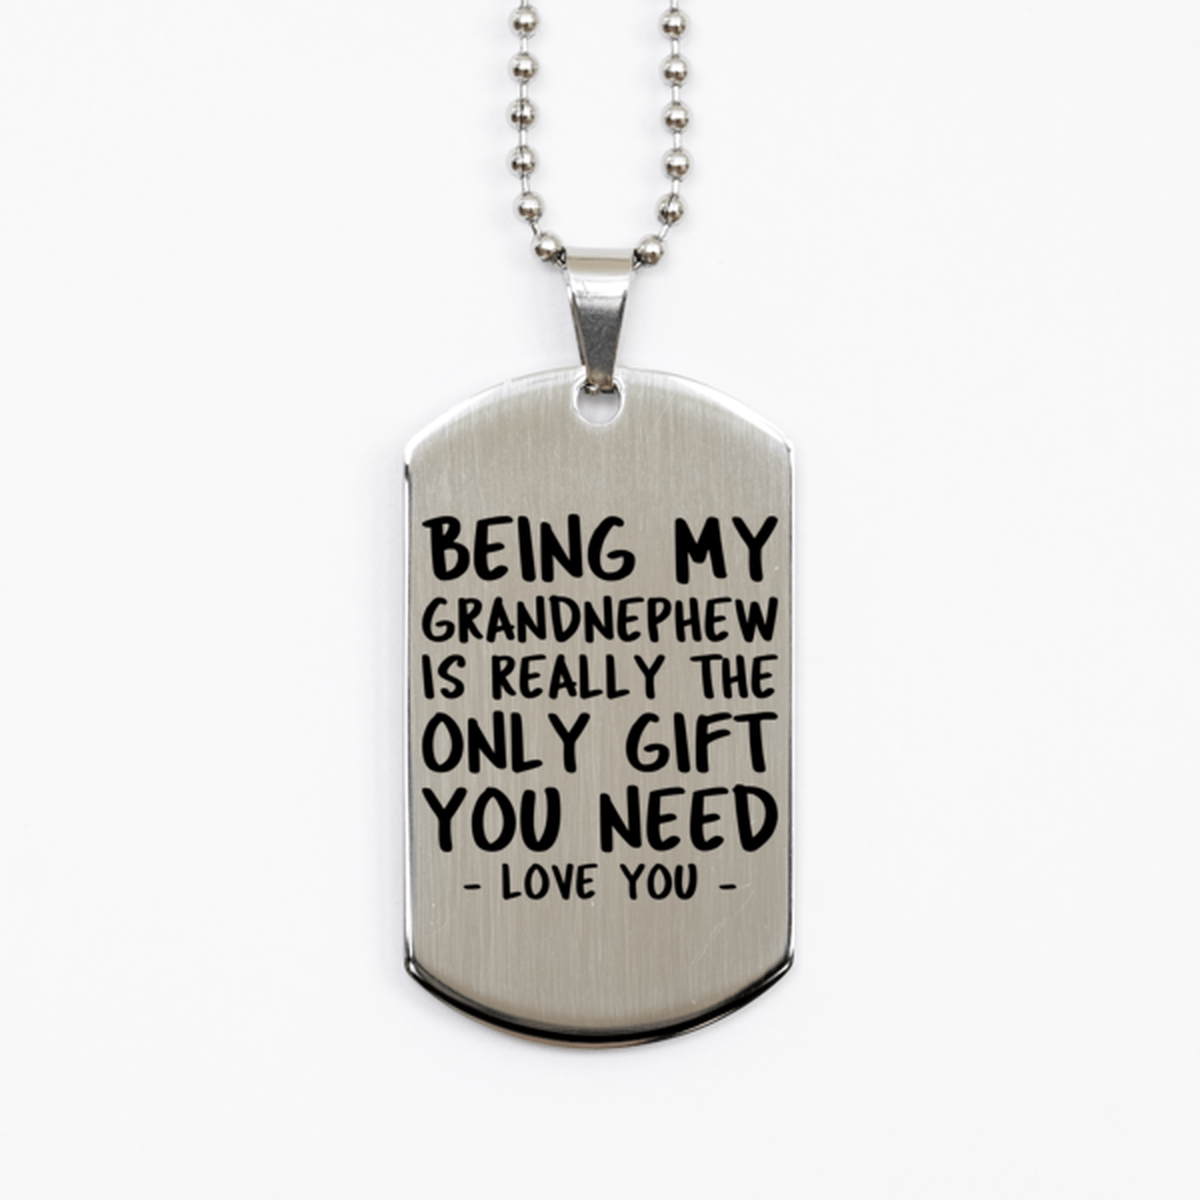 Funny Grandnephew Silver Dog Tag Necklace, Being My Grandnephew Is Really the Only Gift You Need, Best Birthday Gifts for Grandnephew